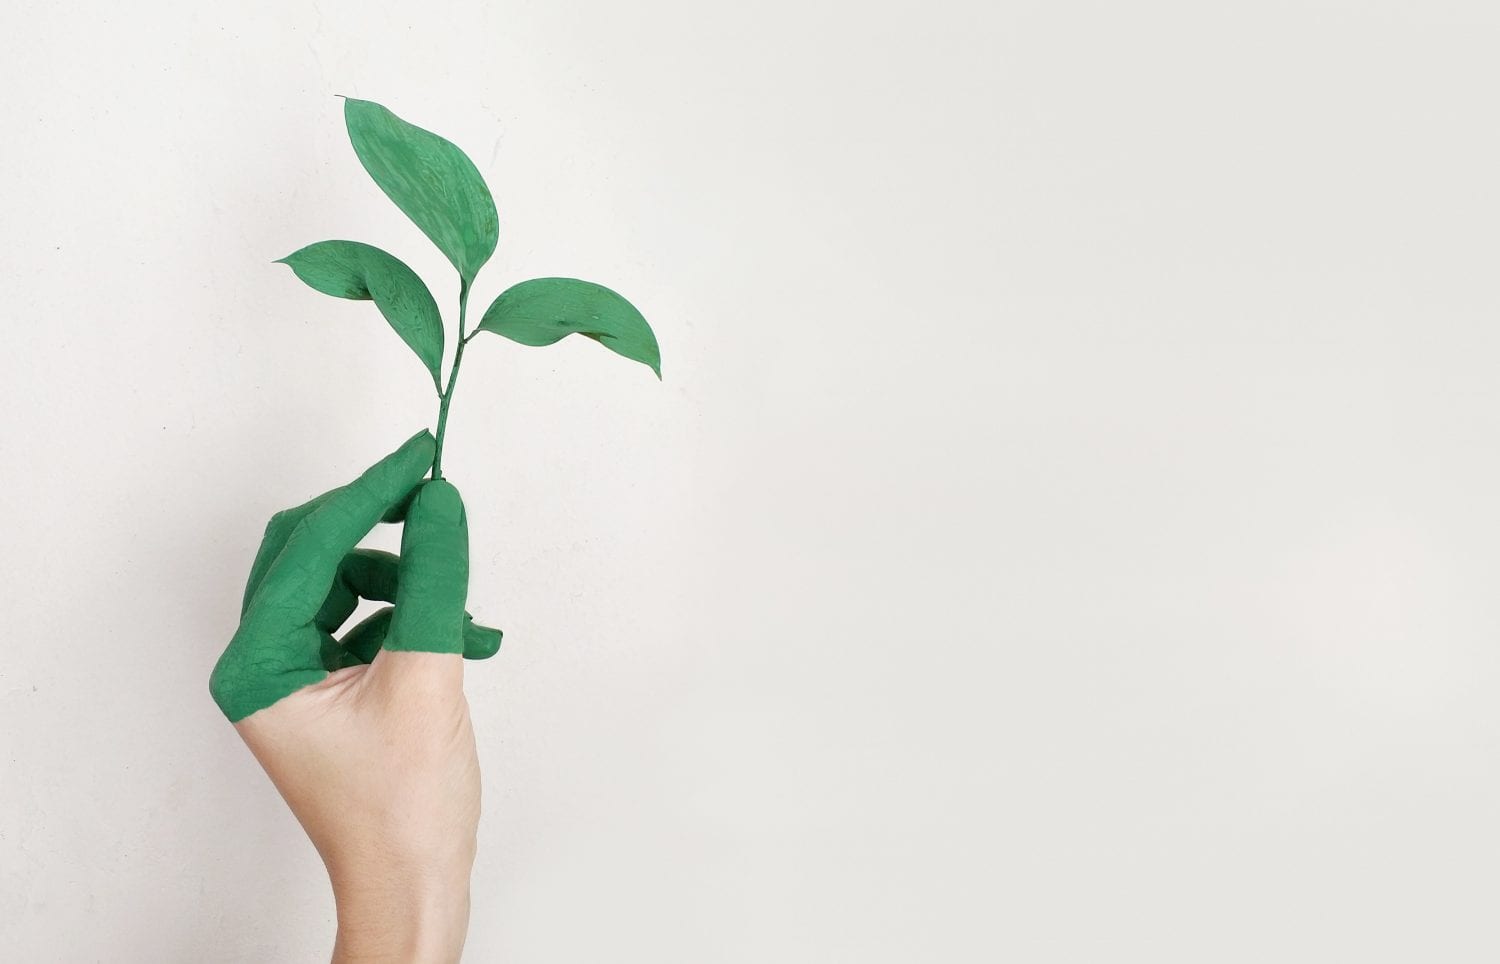 green hand holding up a green plant against a plain white wall